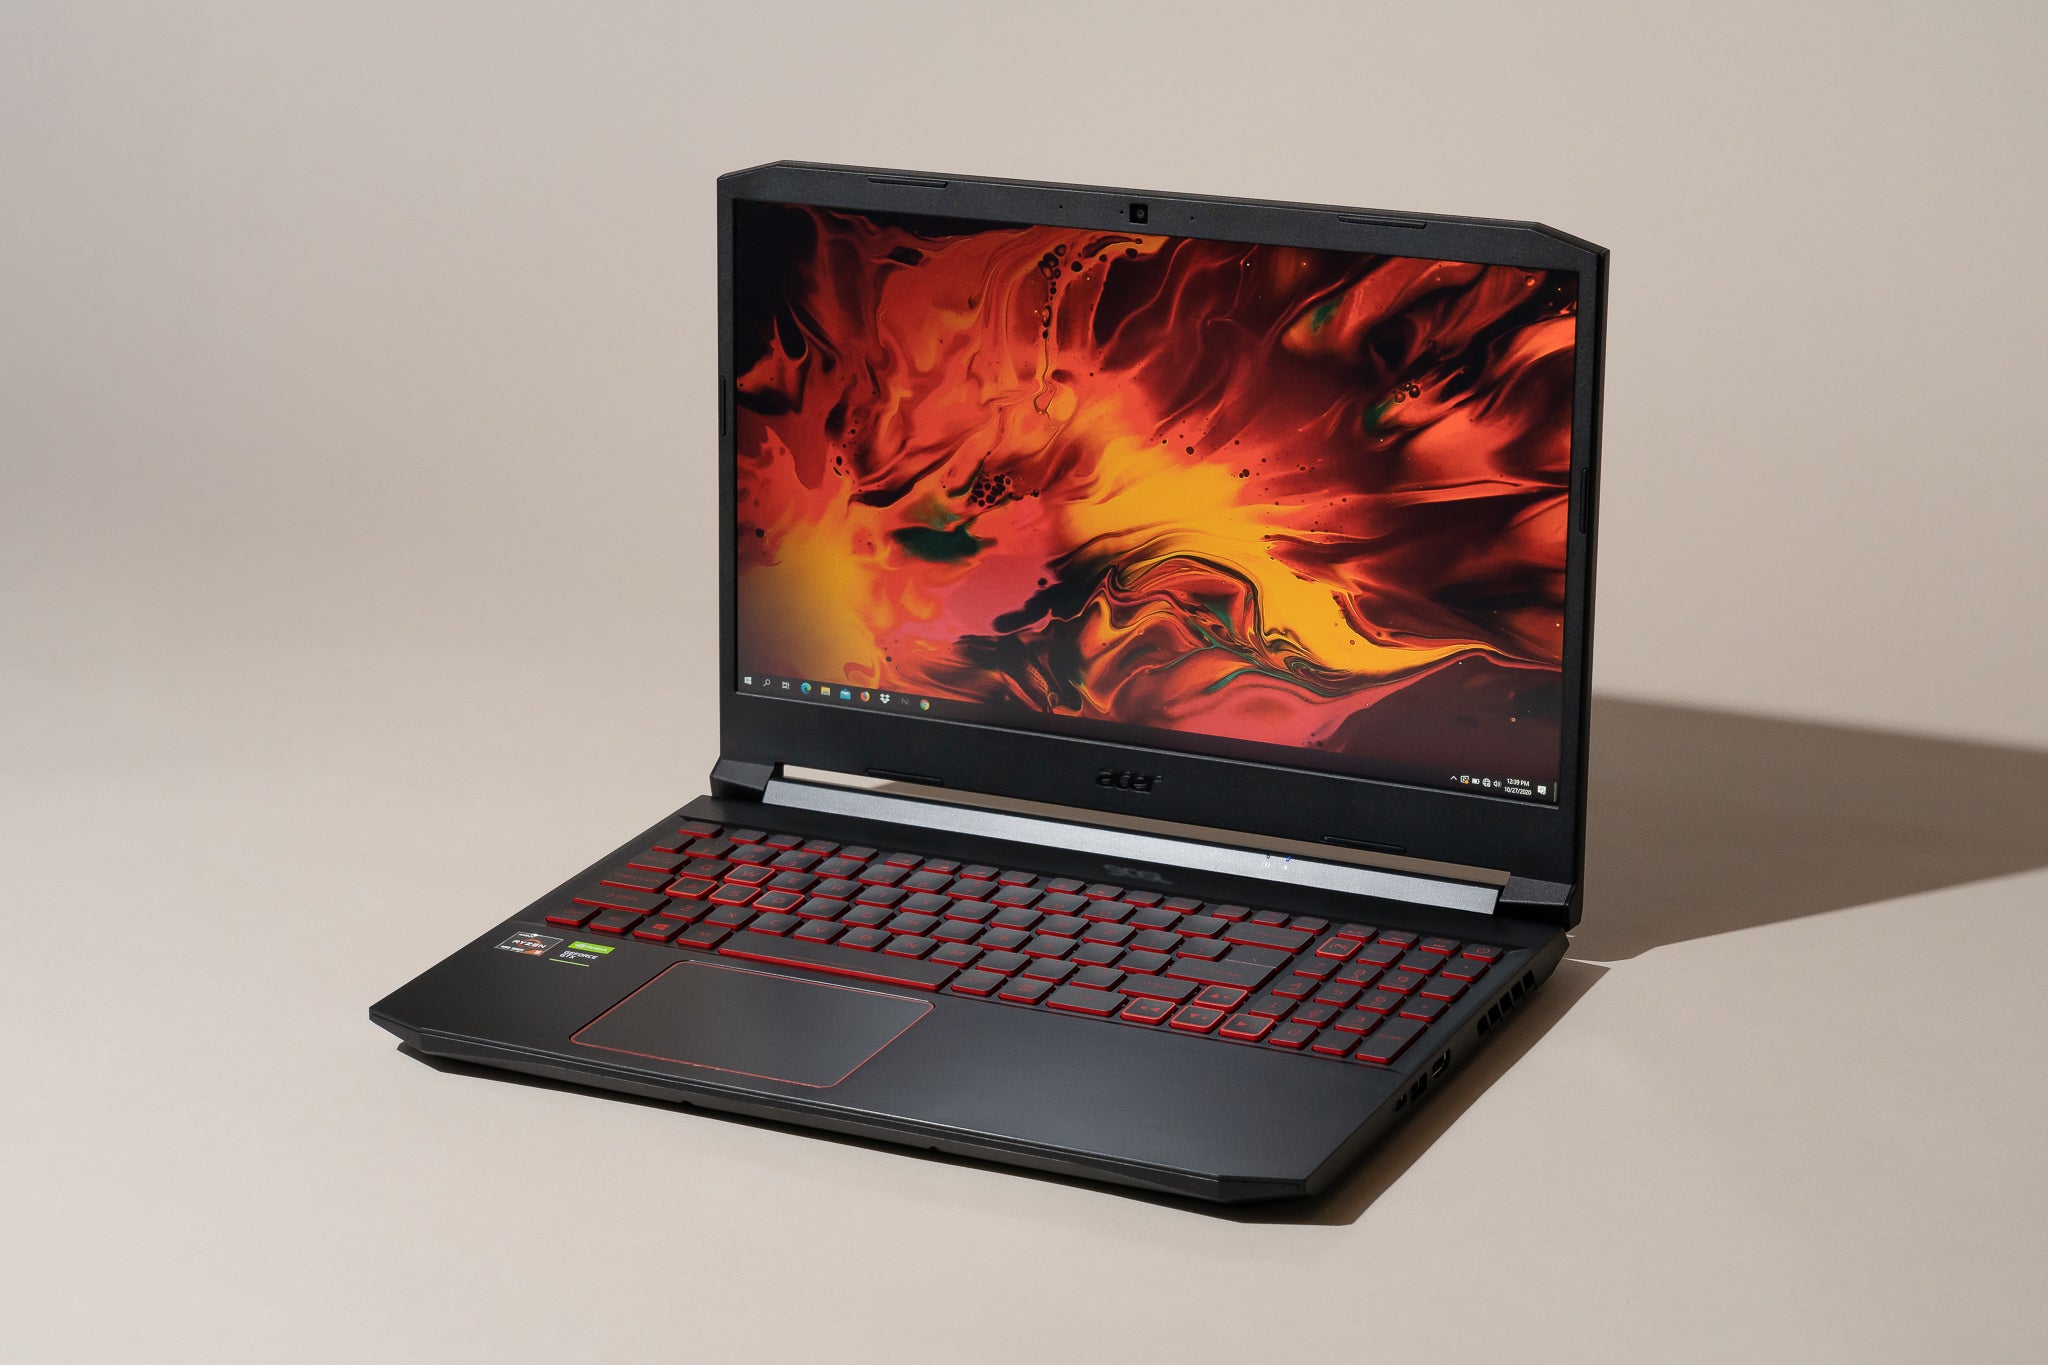 Where Can I Buy A Good Gaming Laptop